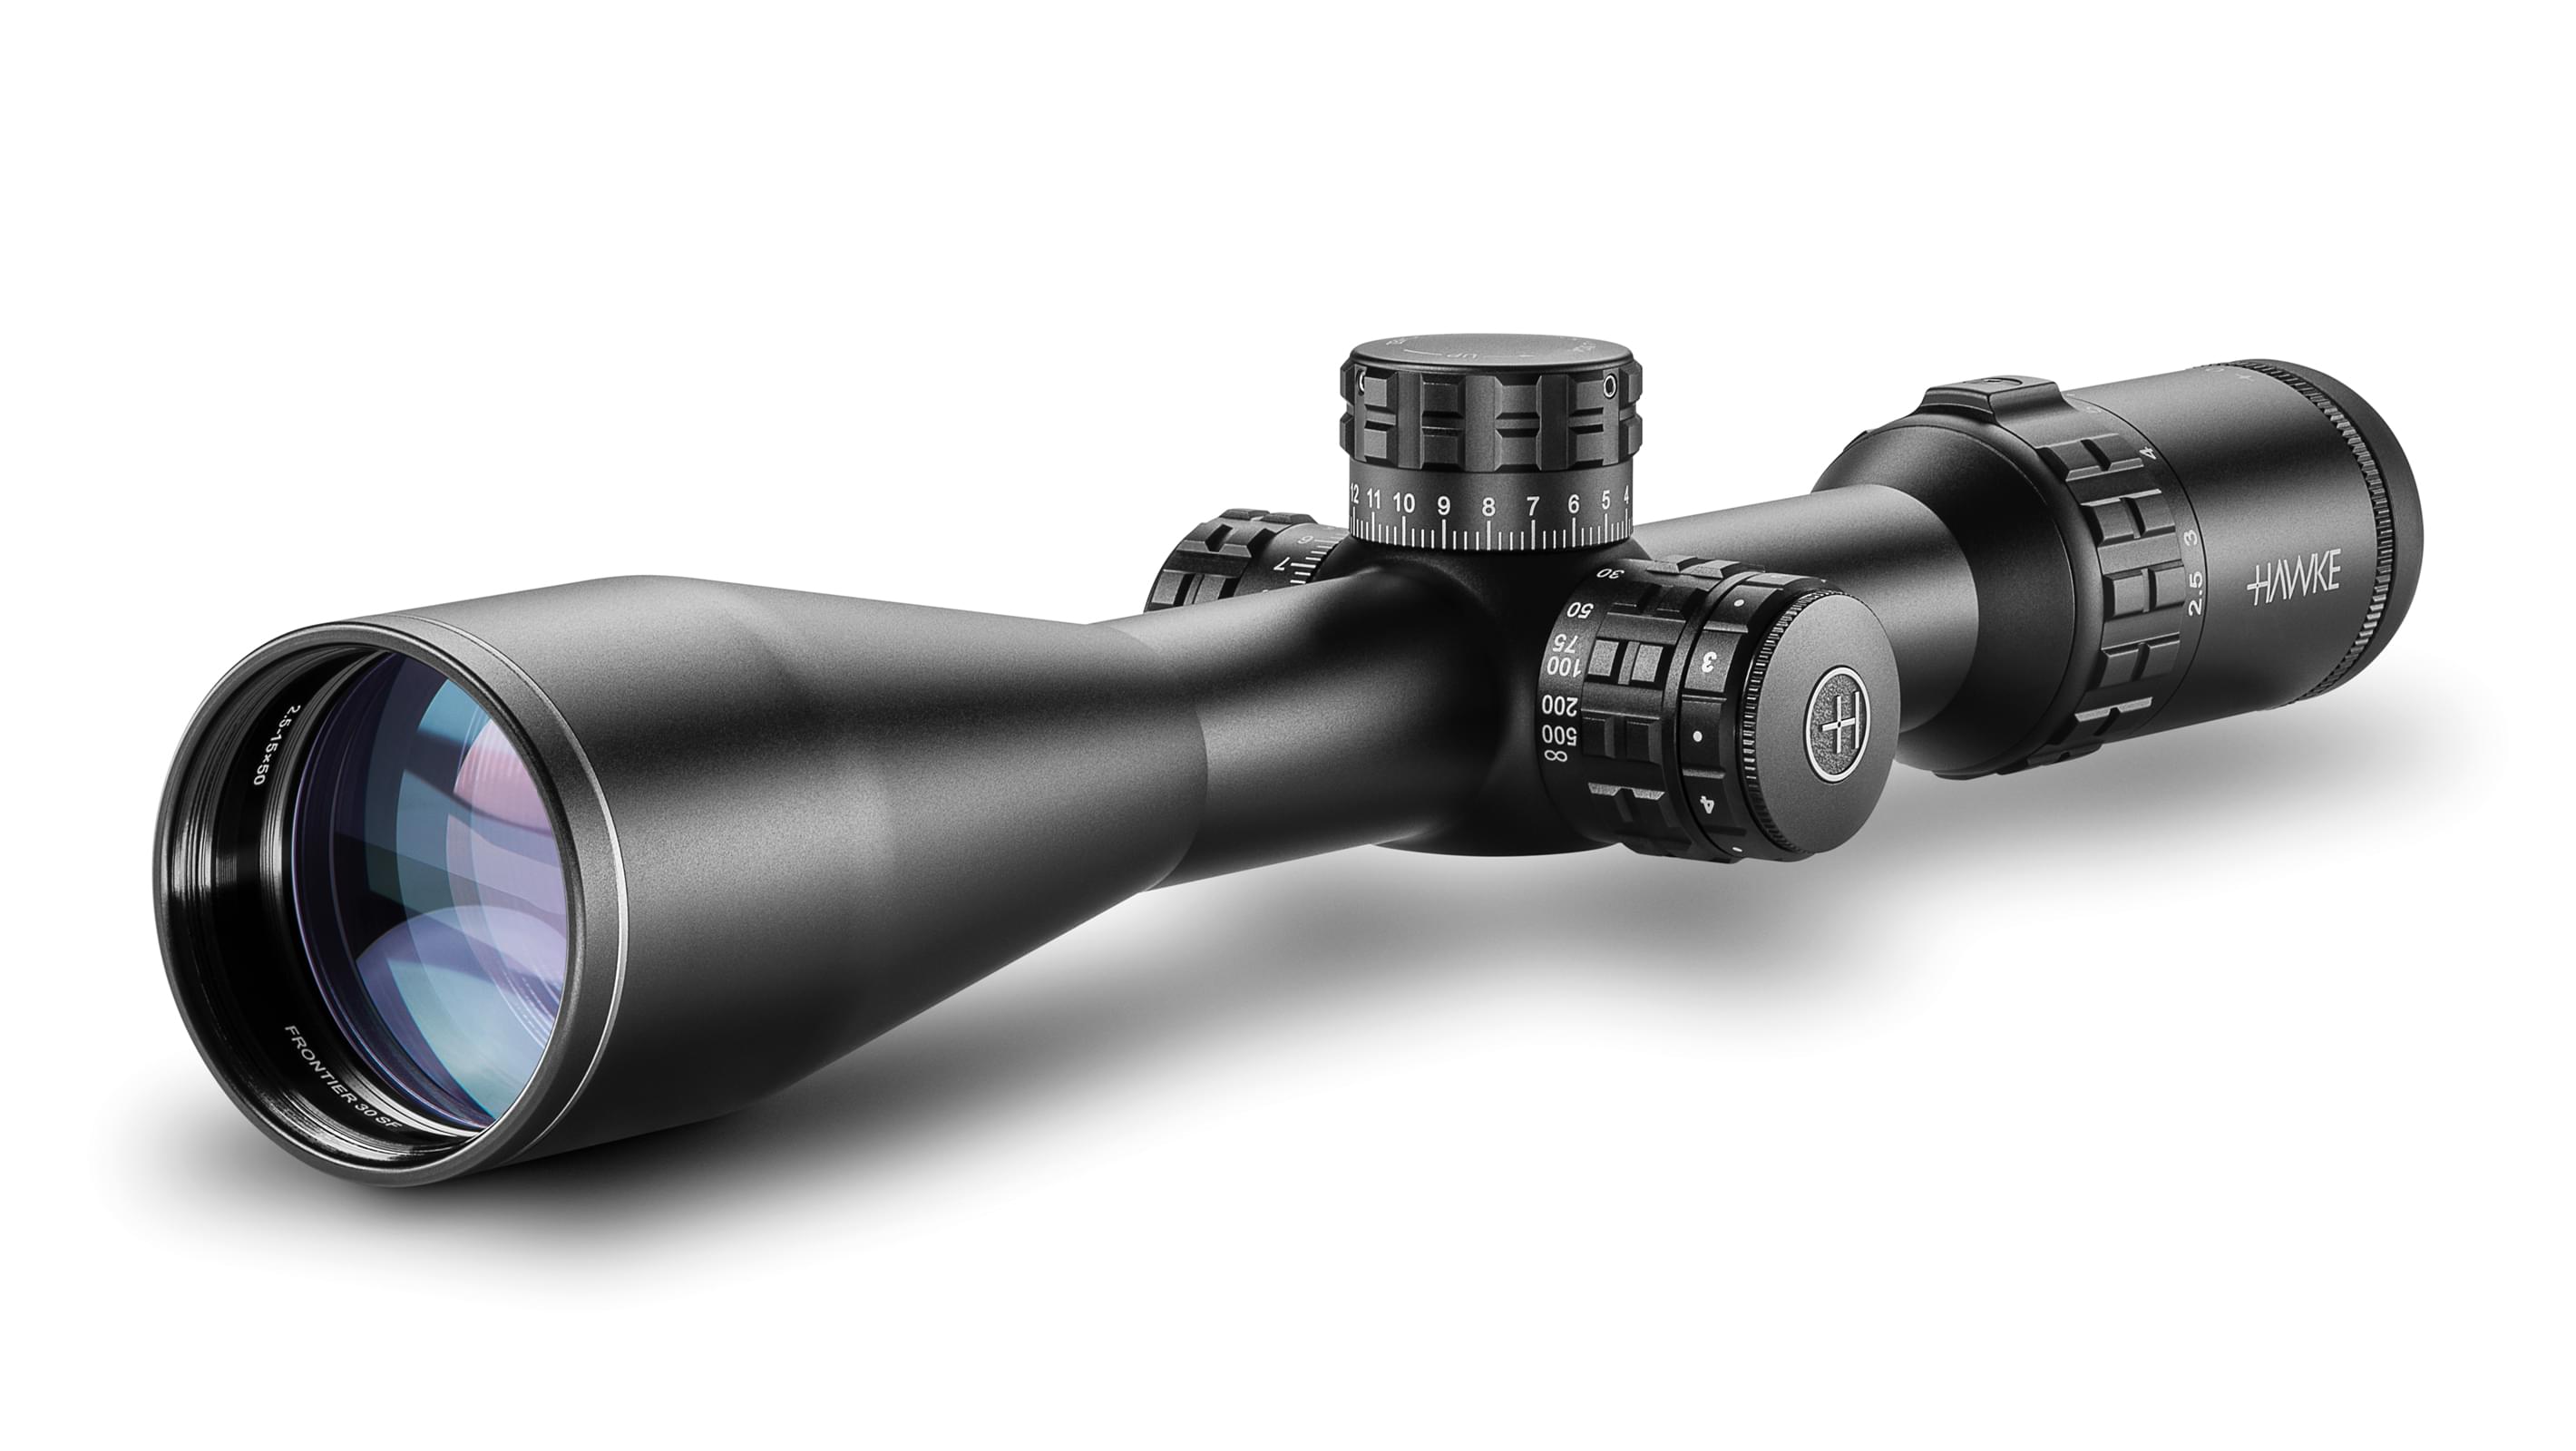 Objective End View Of The Hawke Frontier 30 SF 2.5-15x50 LR Dot Rifle Scope